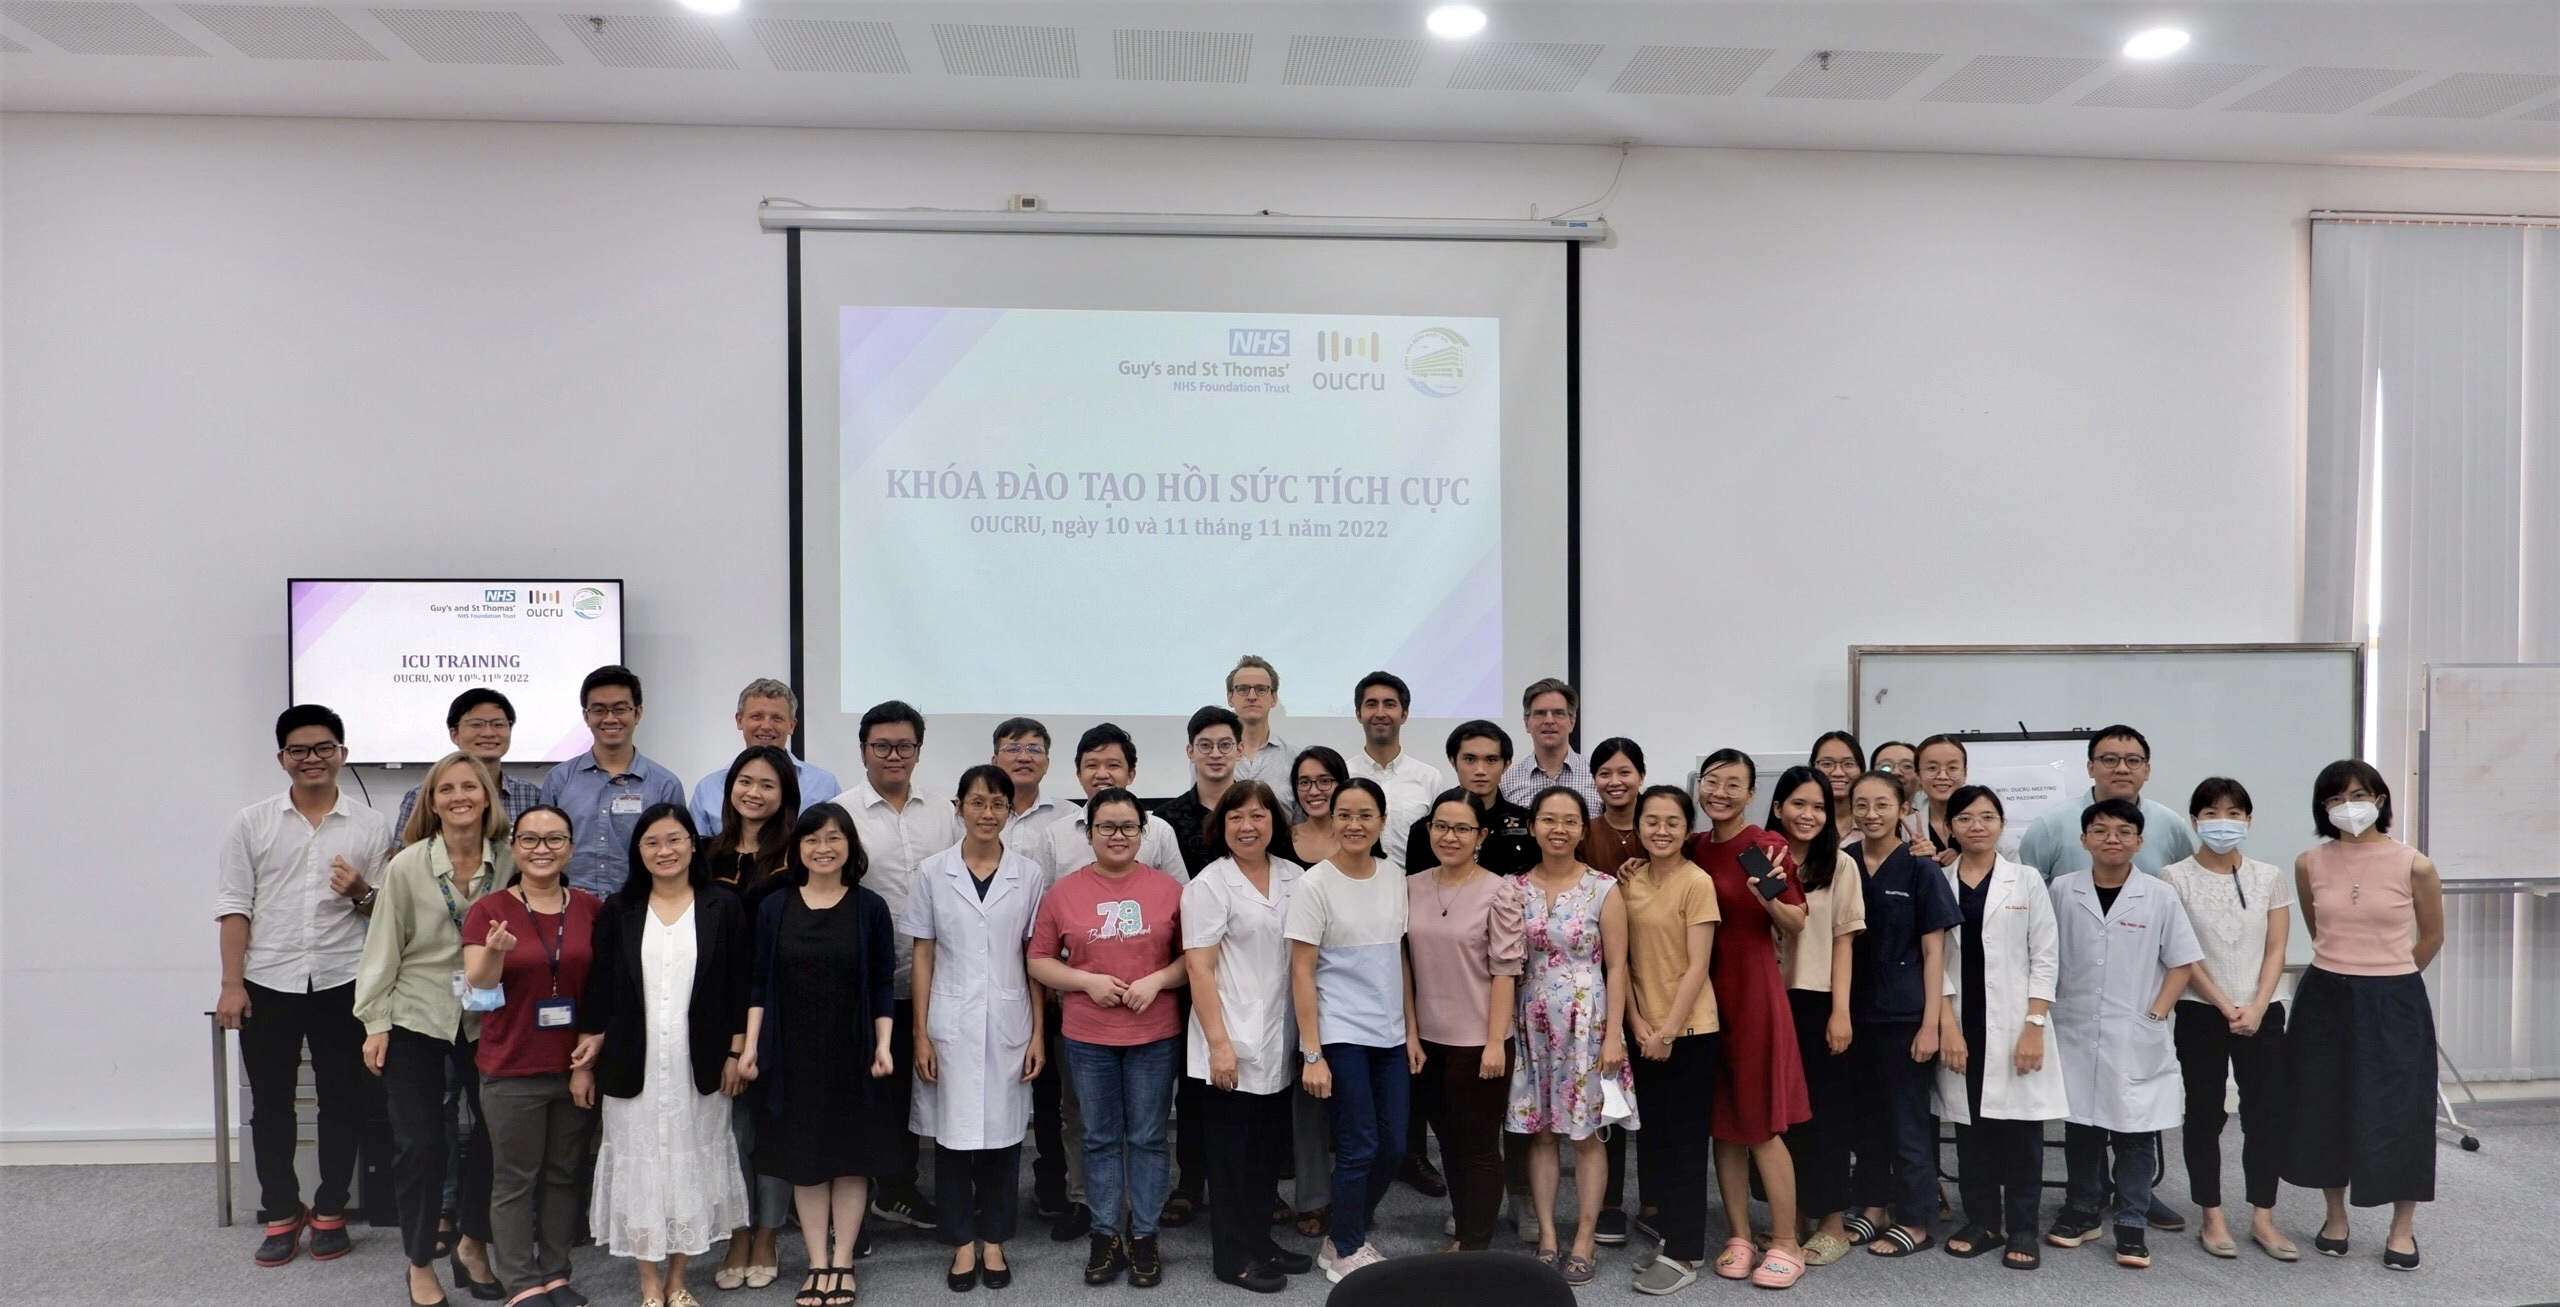 Guy’s and St Thomas’ clinicians share expertise to improve critical care in Vietnam